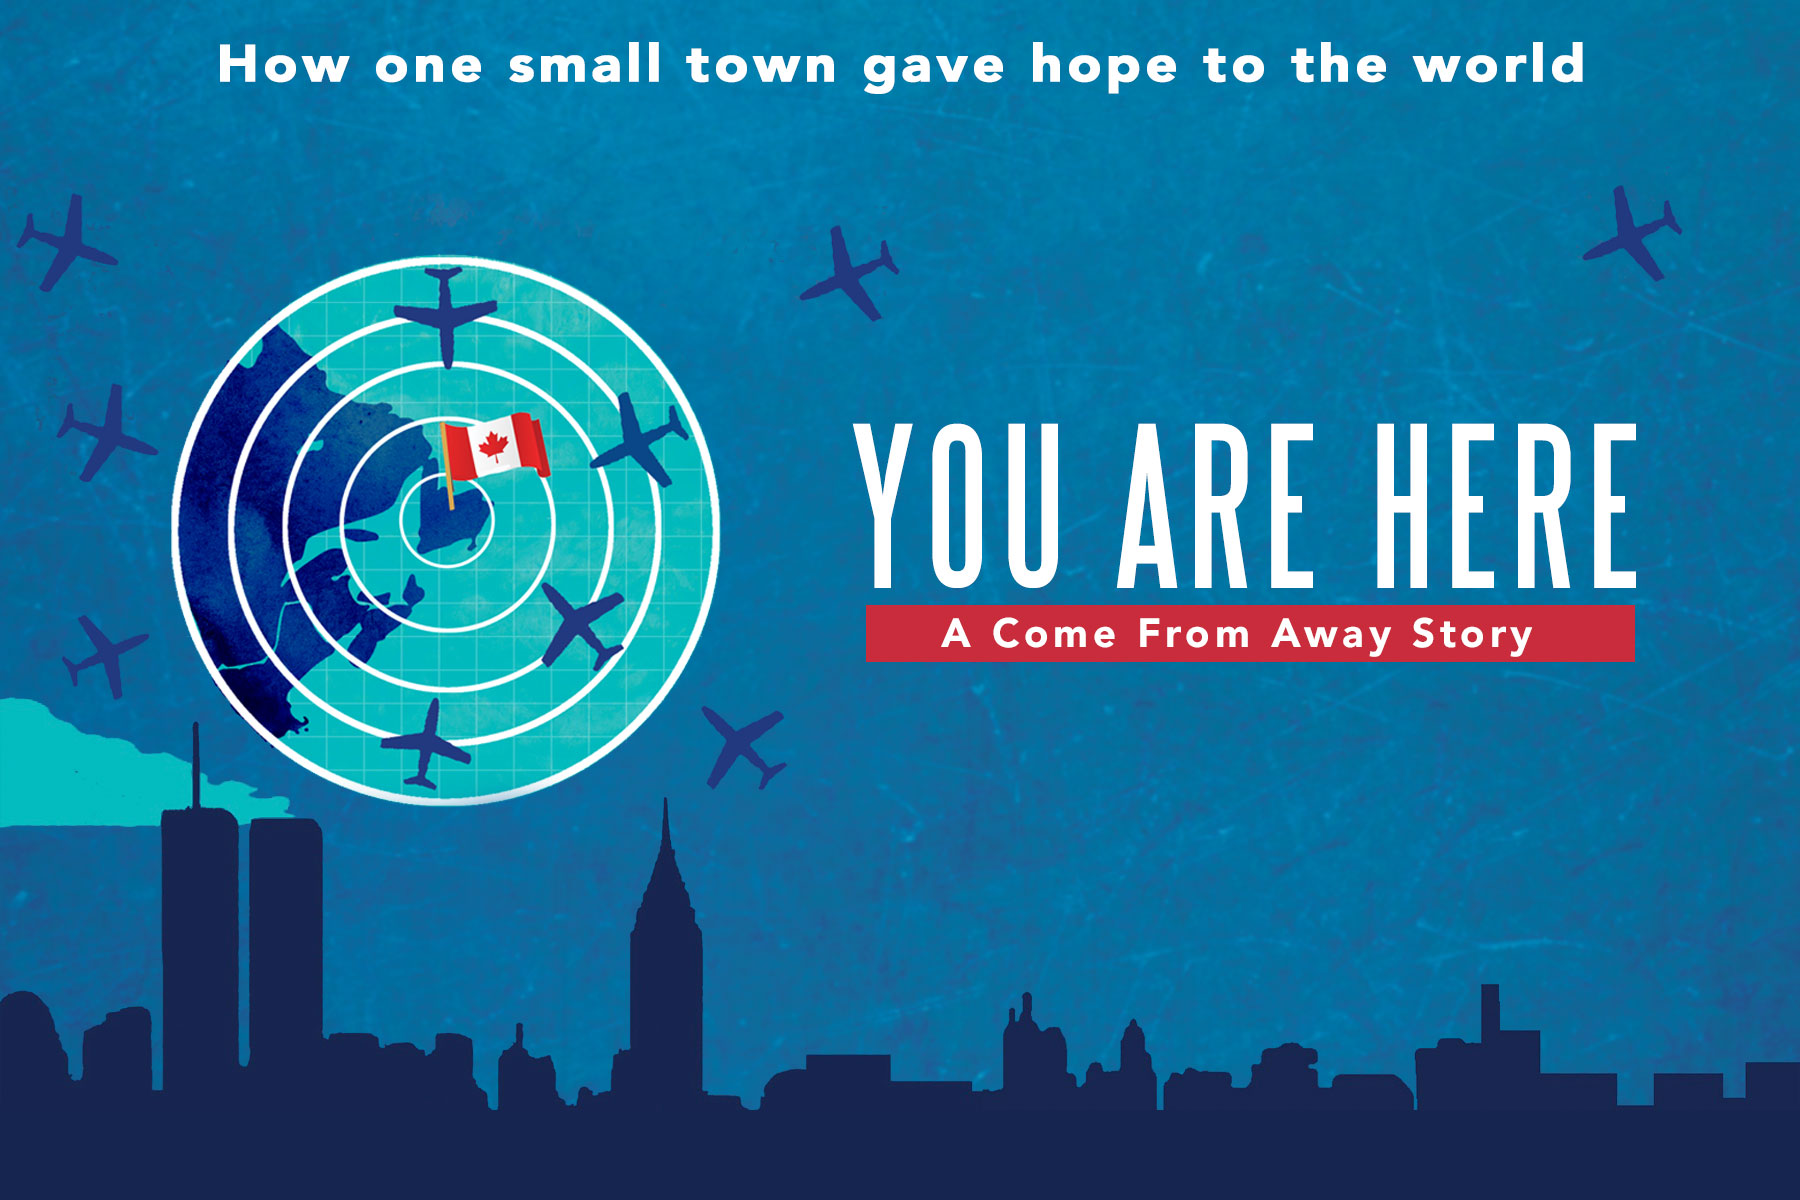 REVIEW: ‘You Are Here’ provides an uplifting, overlooked story from 9/11 - WordSlingers